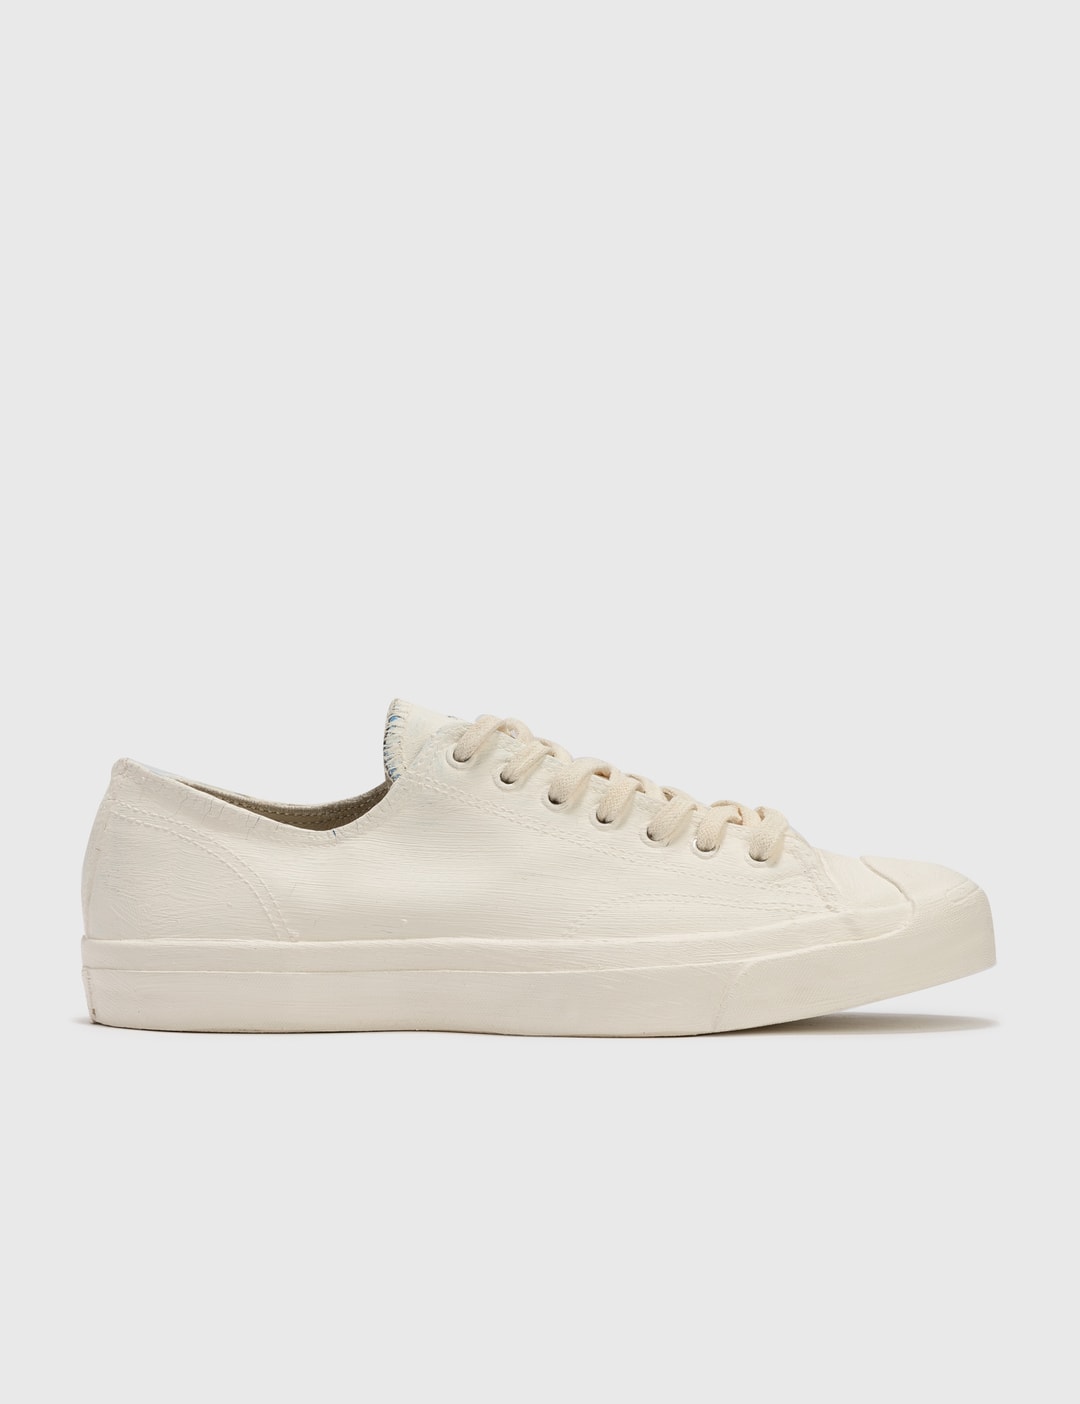 Converse - Converse 1st String Maison Margiela Jack | HBX - Globally Curated and Lifestyle by Hypebeast